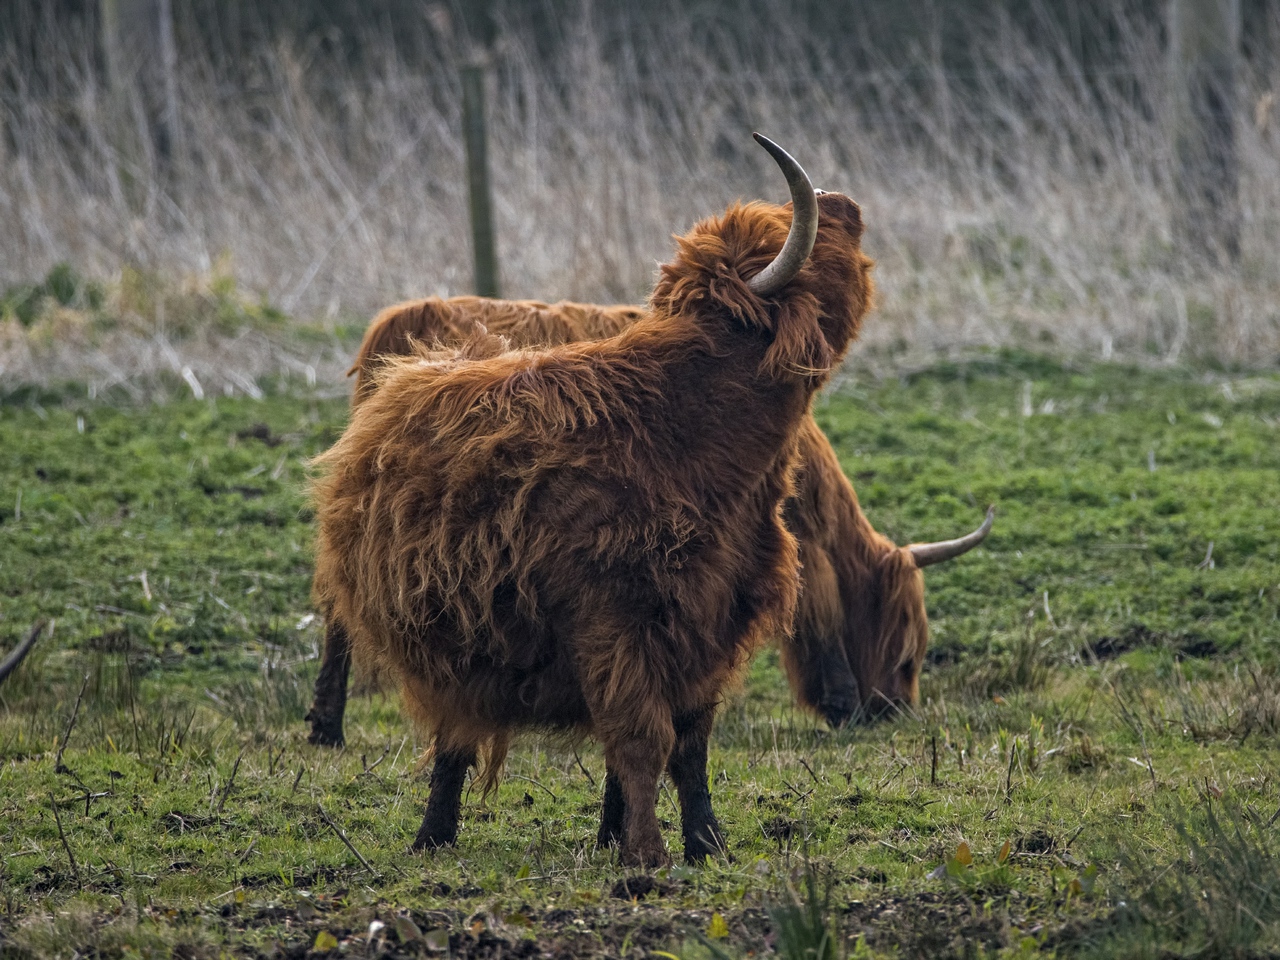 Highland cattle on the Sculthorpe Moor